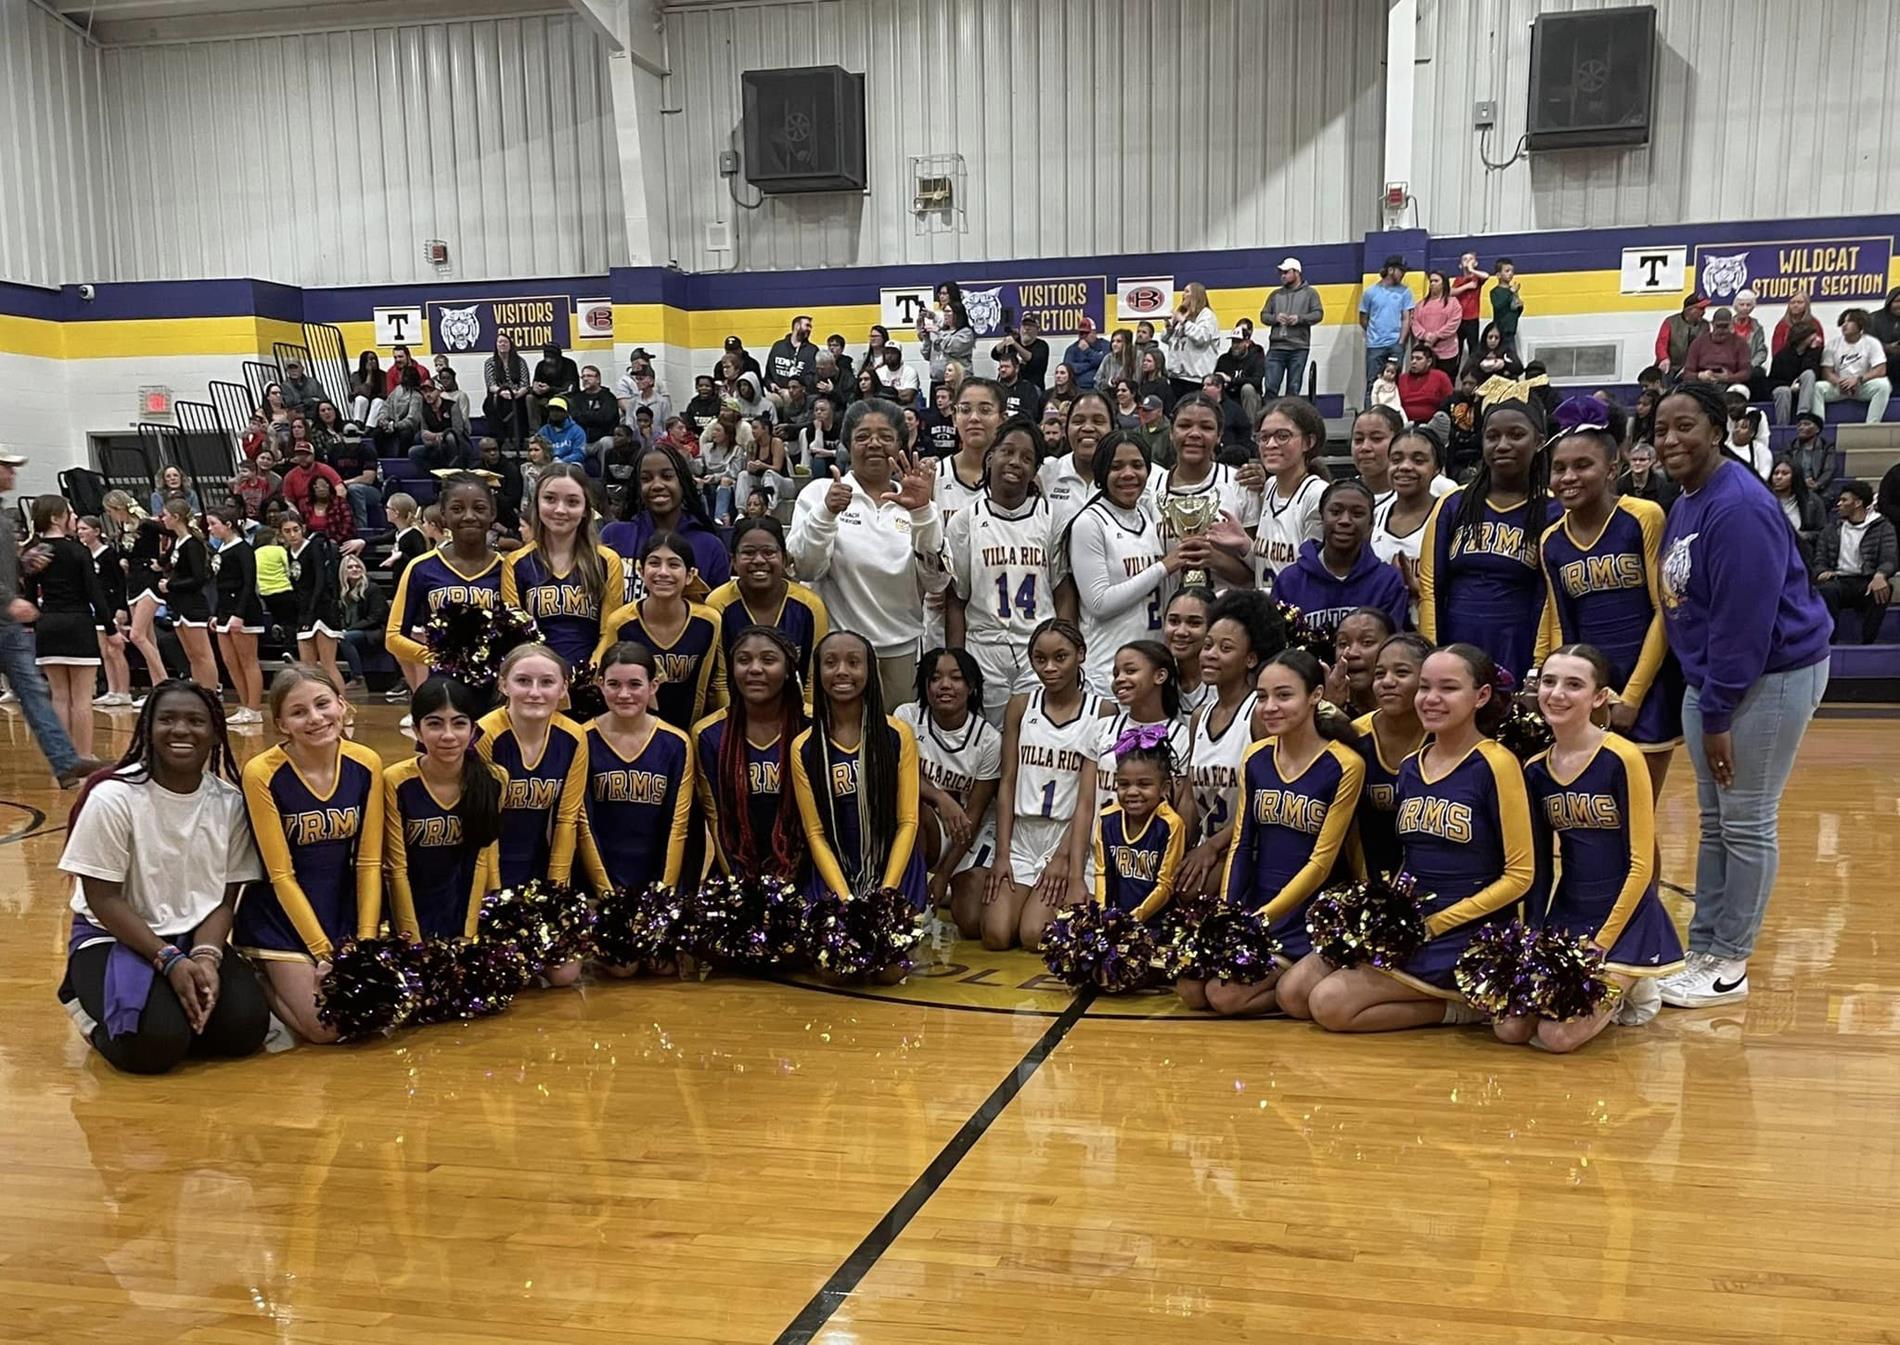 Girls basketball team championship picture with cheerleaders.